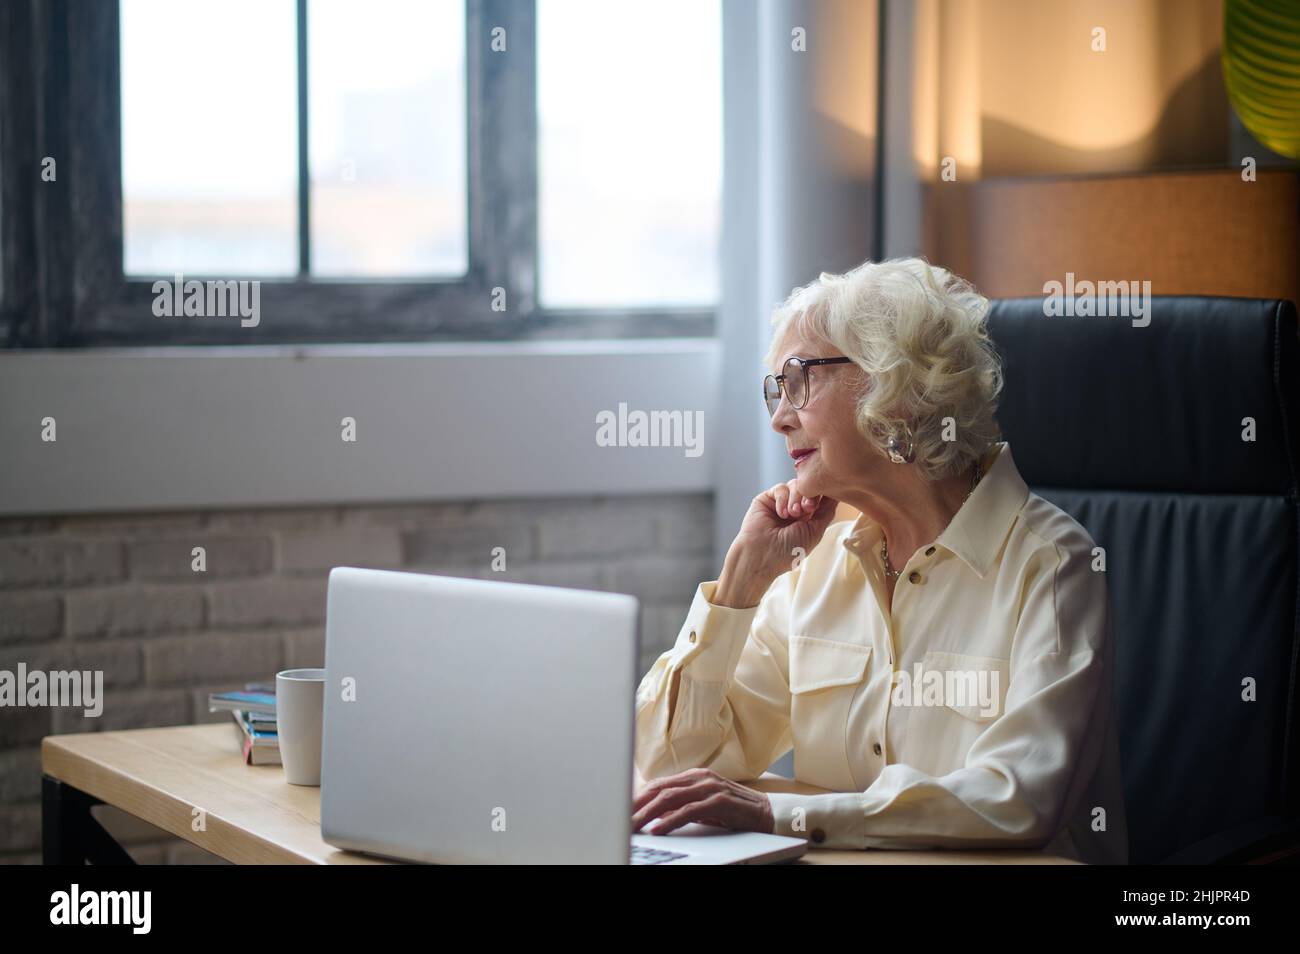 Woman looking at window sitting at table with laptop Stock Photo